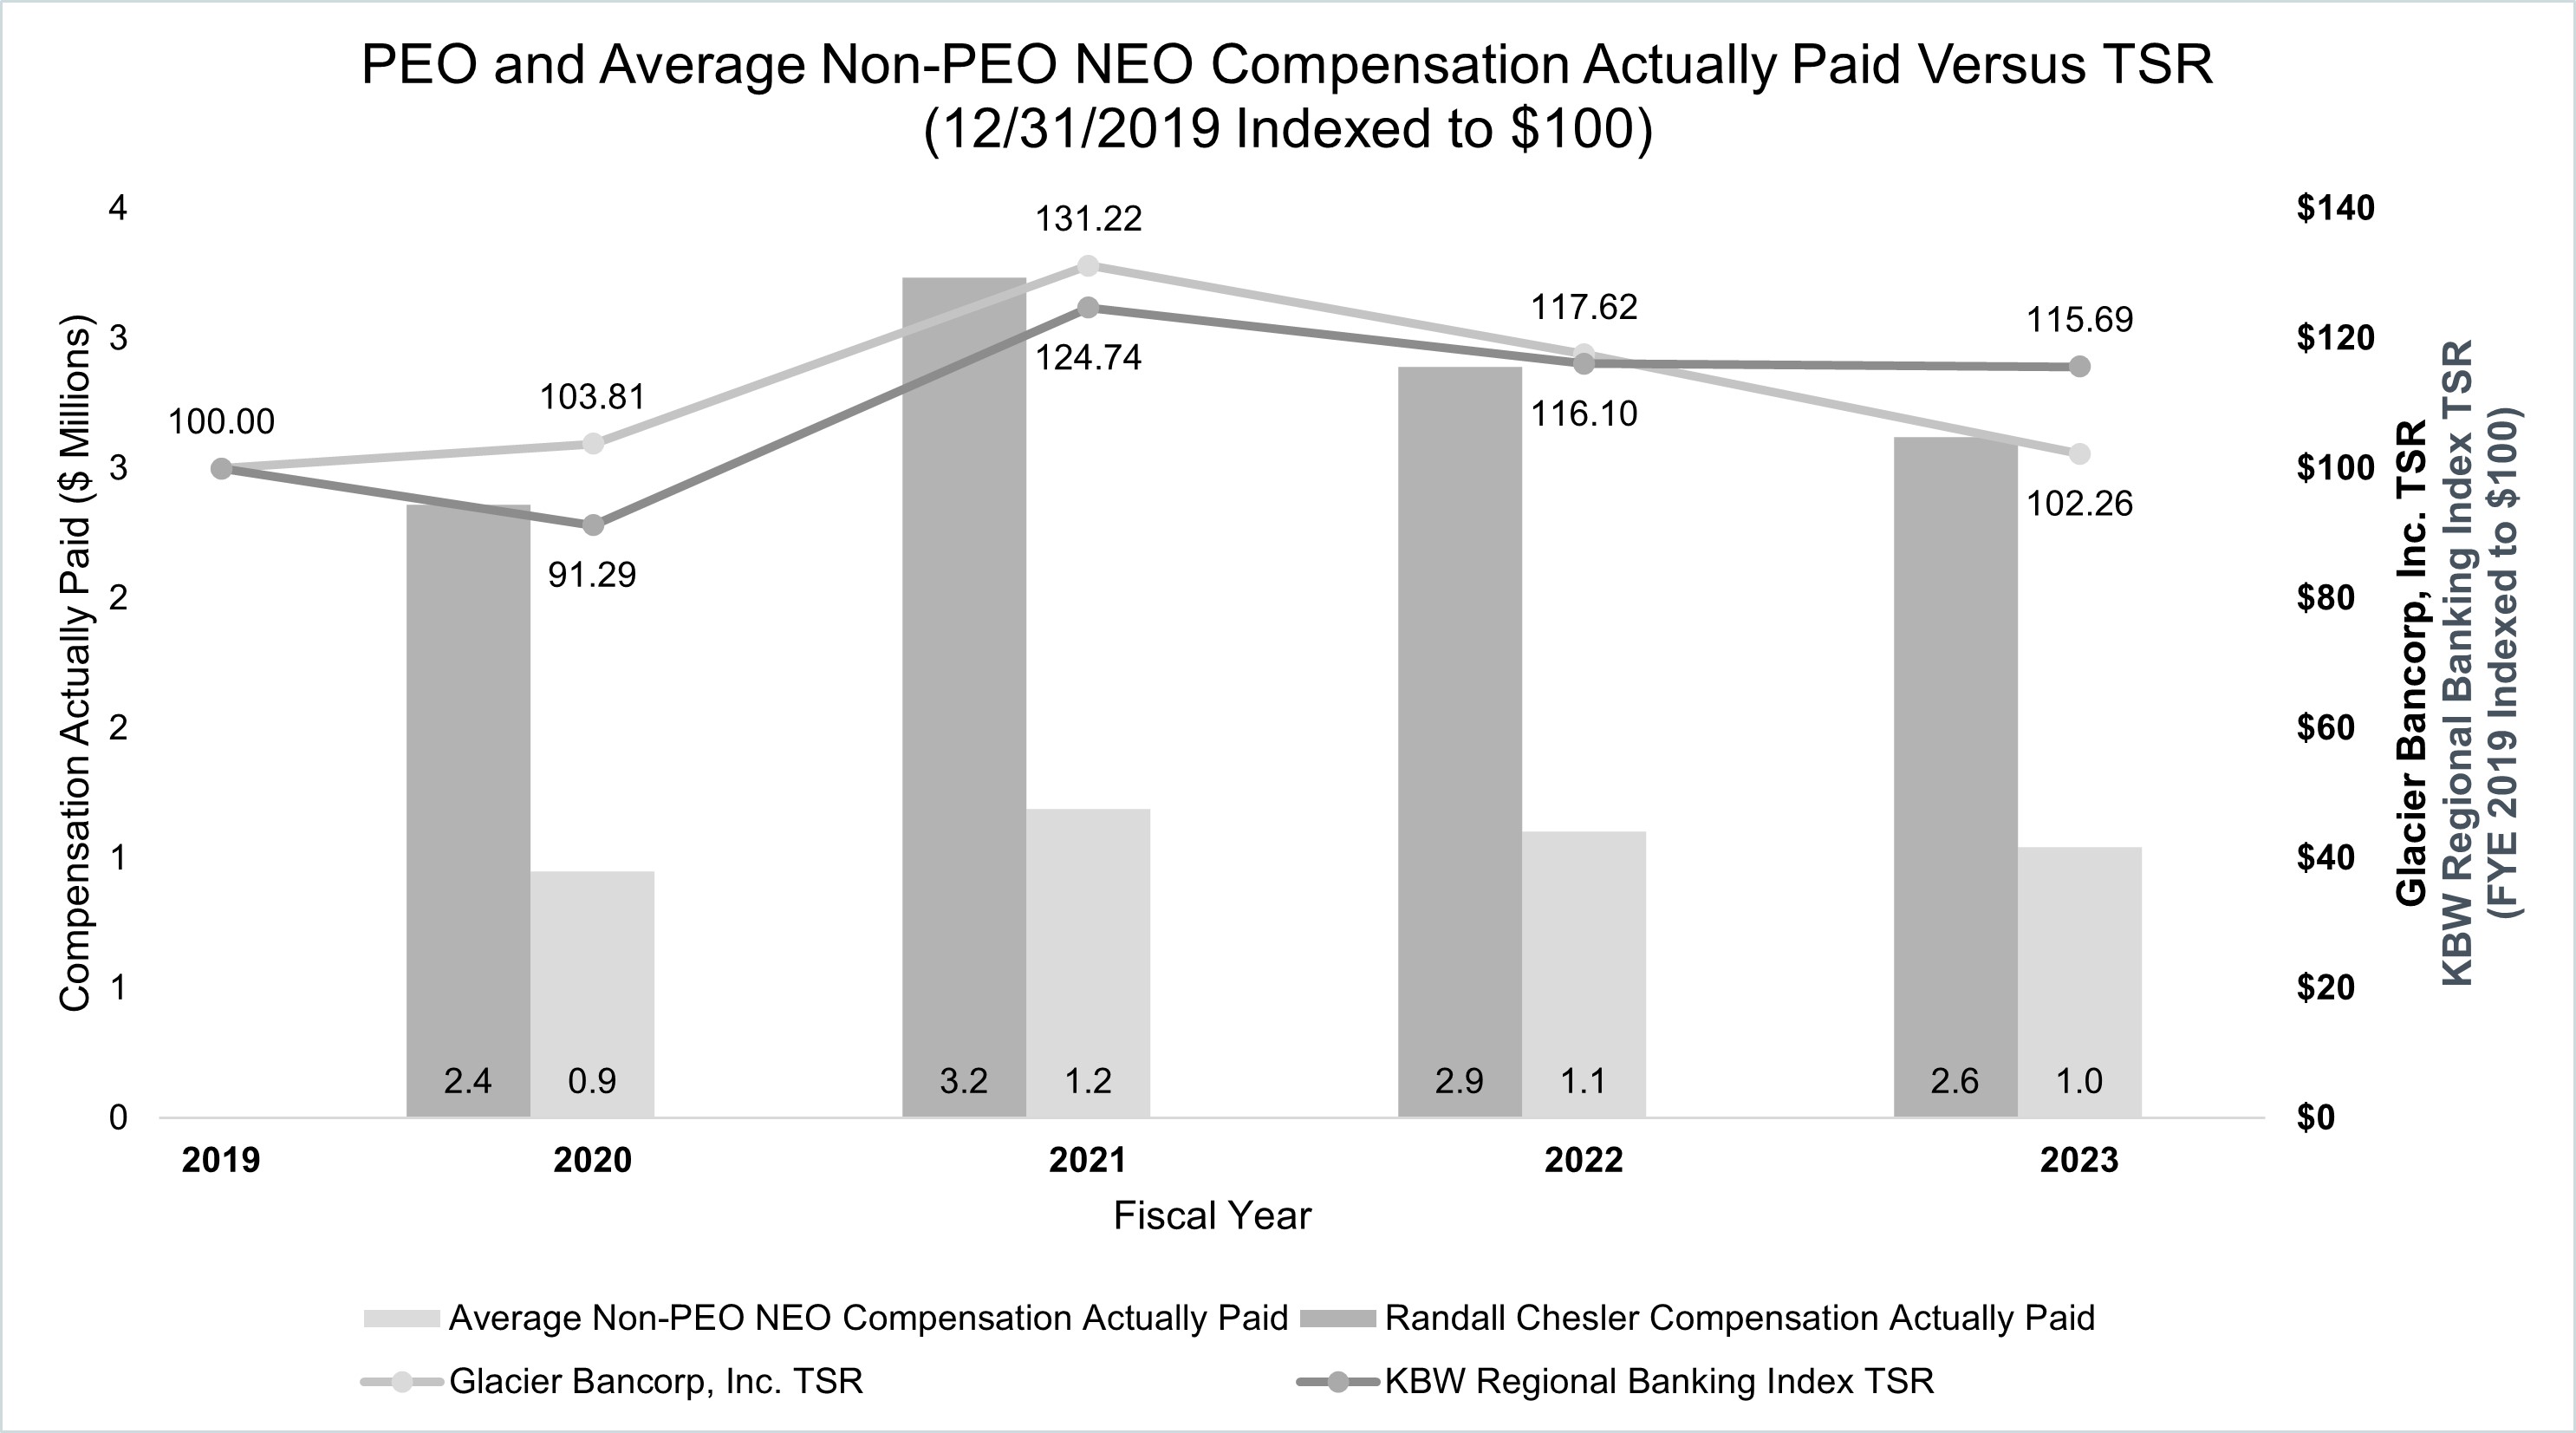 PEO and Average Non-PEO NEO Compensation paid vs TSR bw.jpg